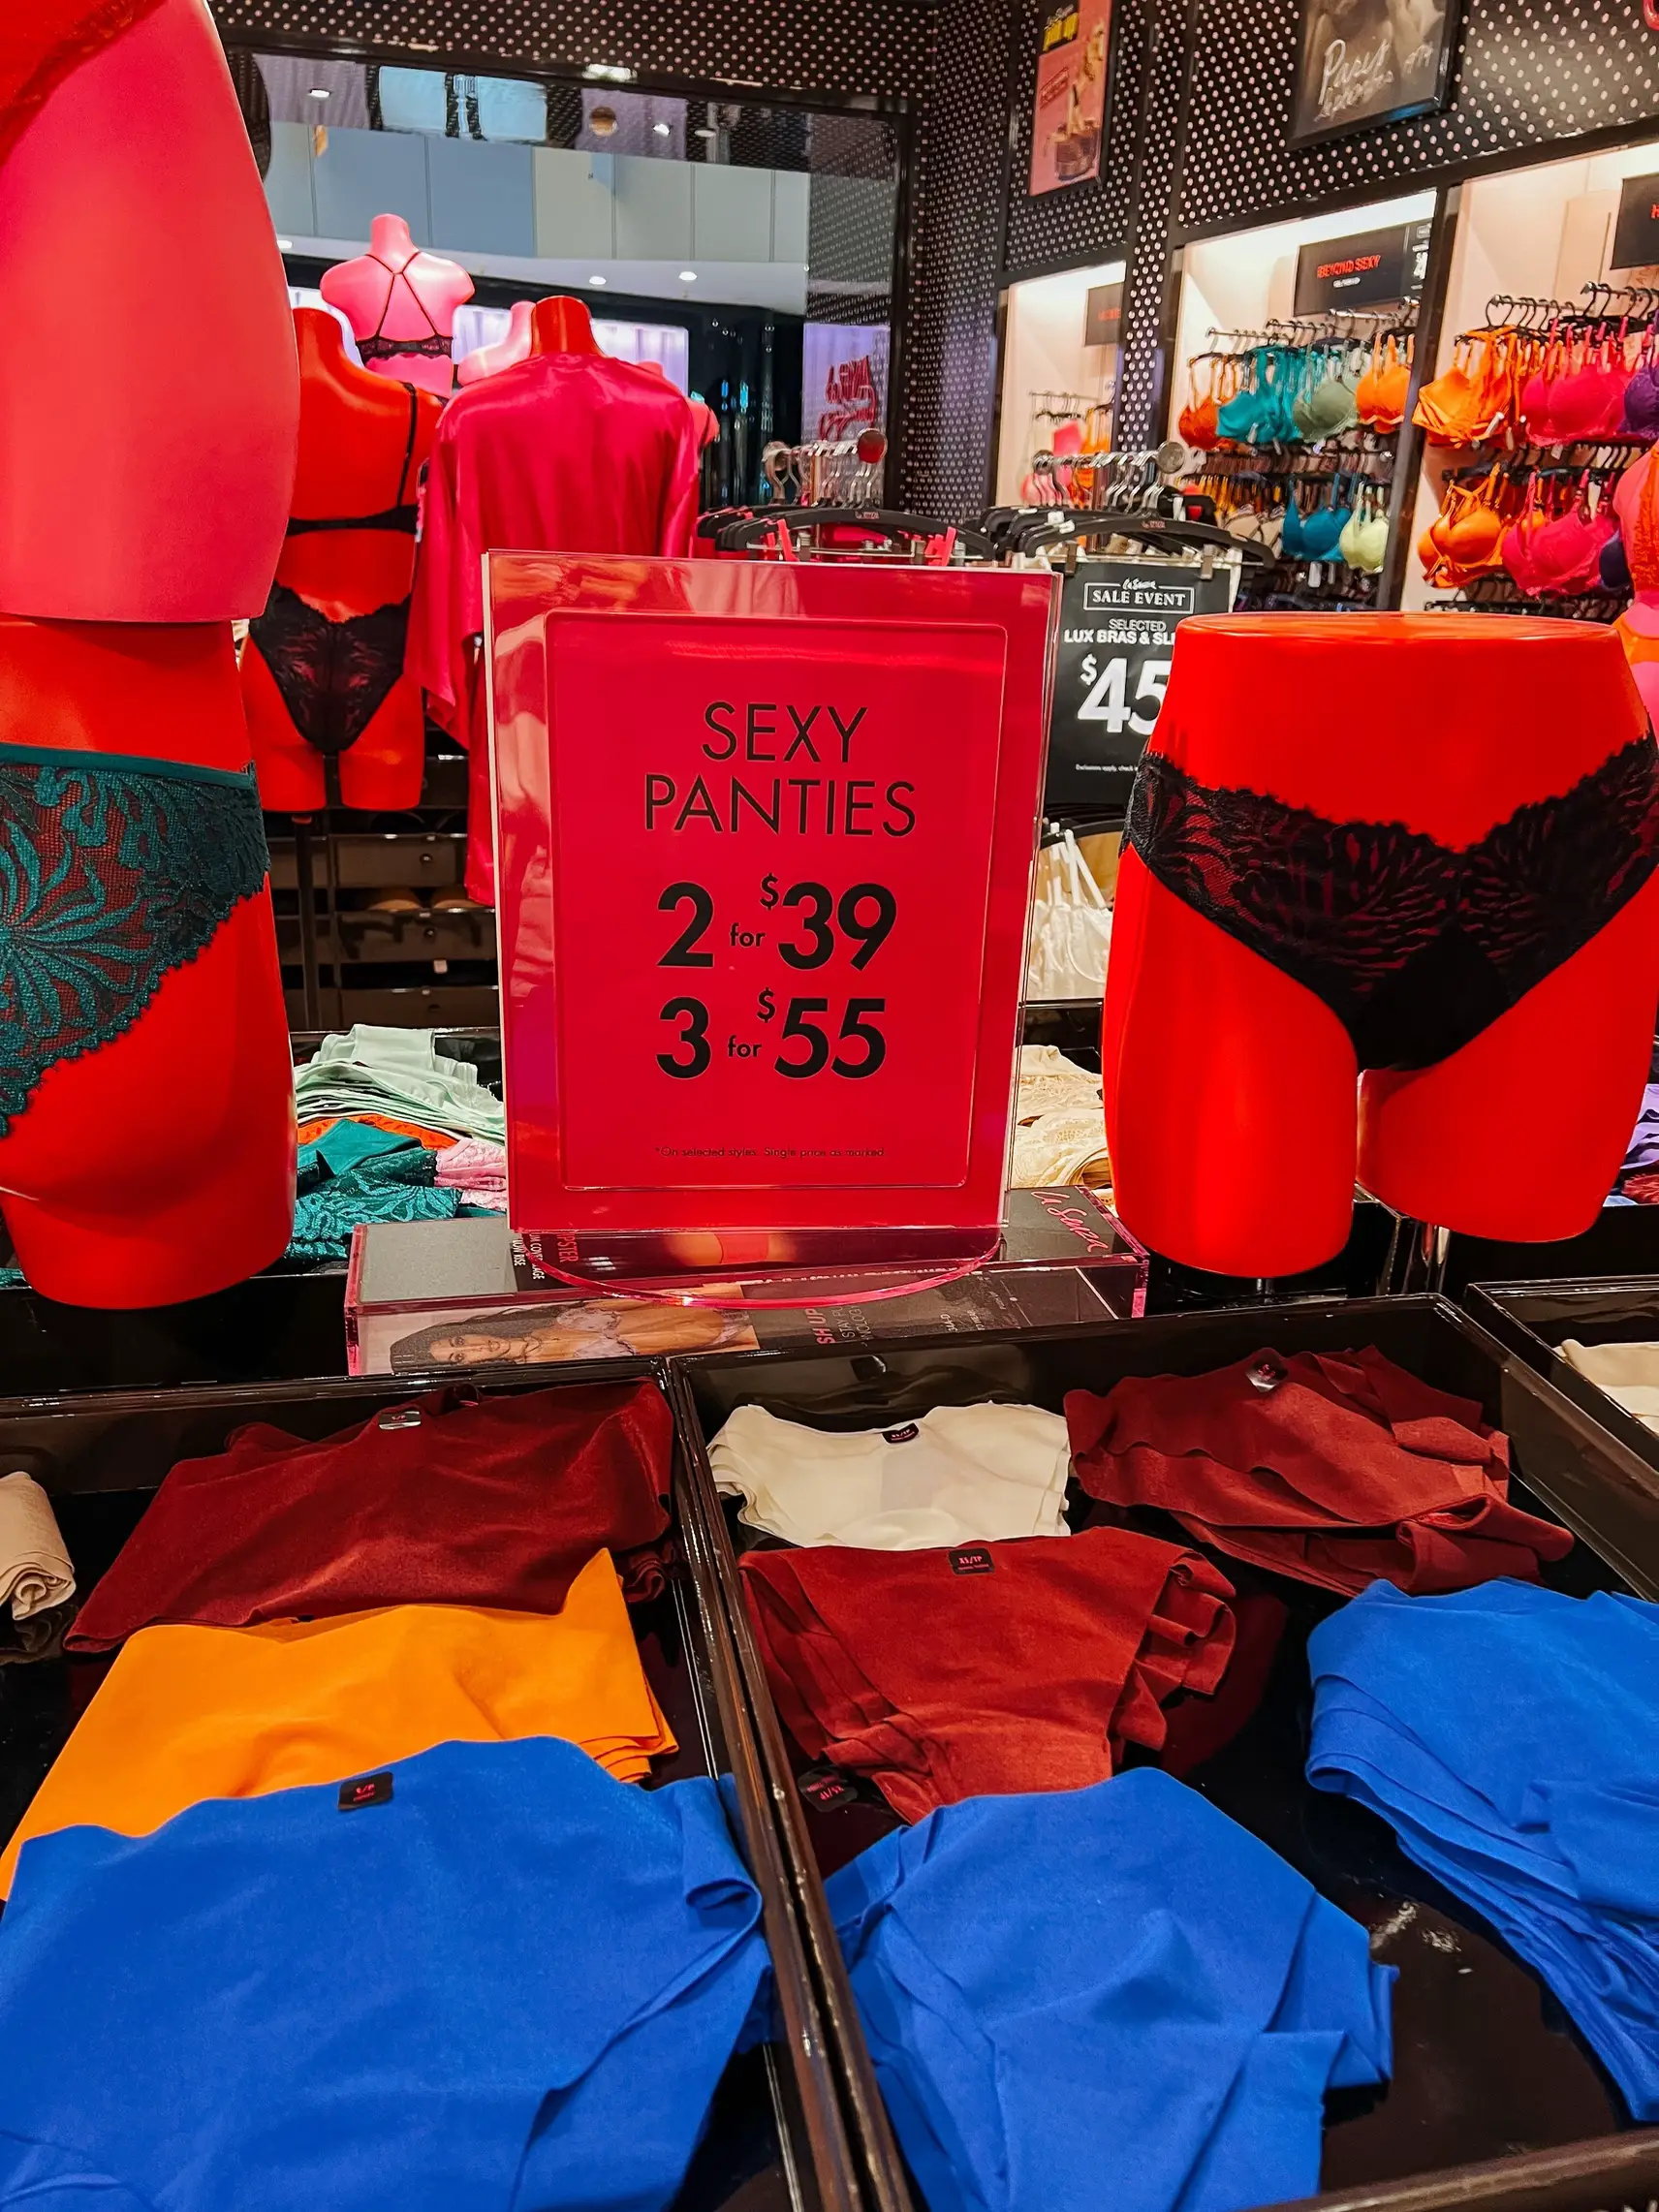 Bendon Outlet's $30 Sale* starts today! ⁠ ⁠ o $30 on Selected Bras, Briefs  and sleepwear.⁠ o Lovable bras $15 and briefs $10 selected…